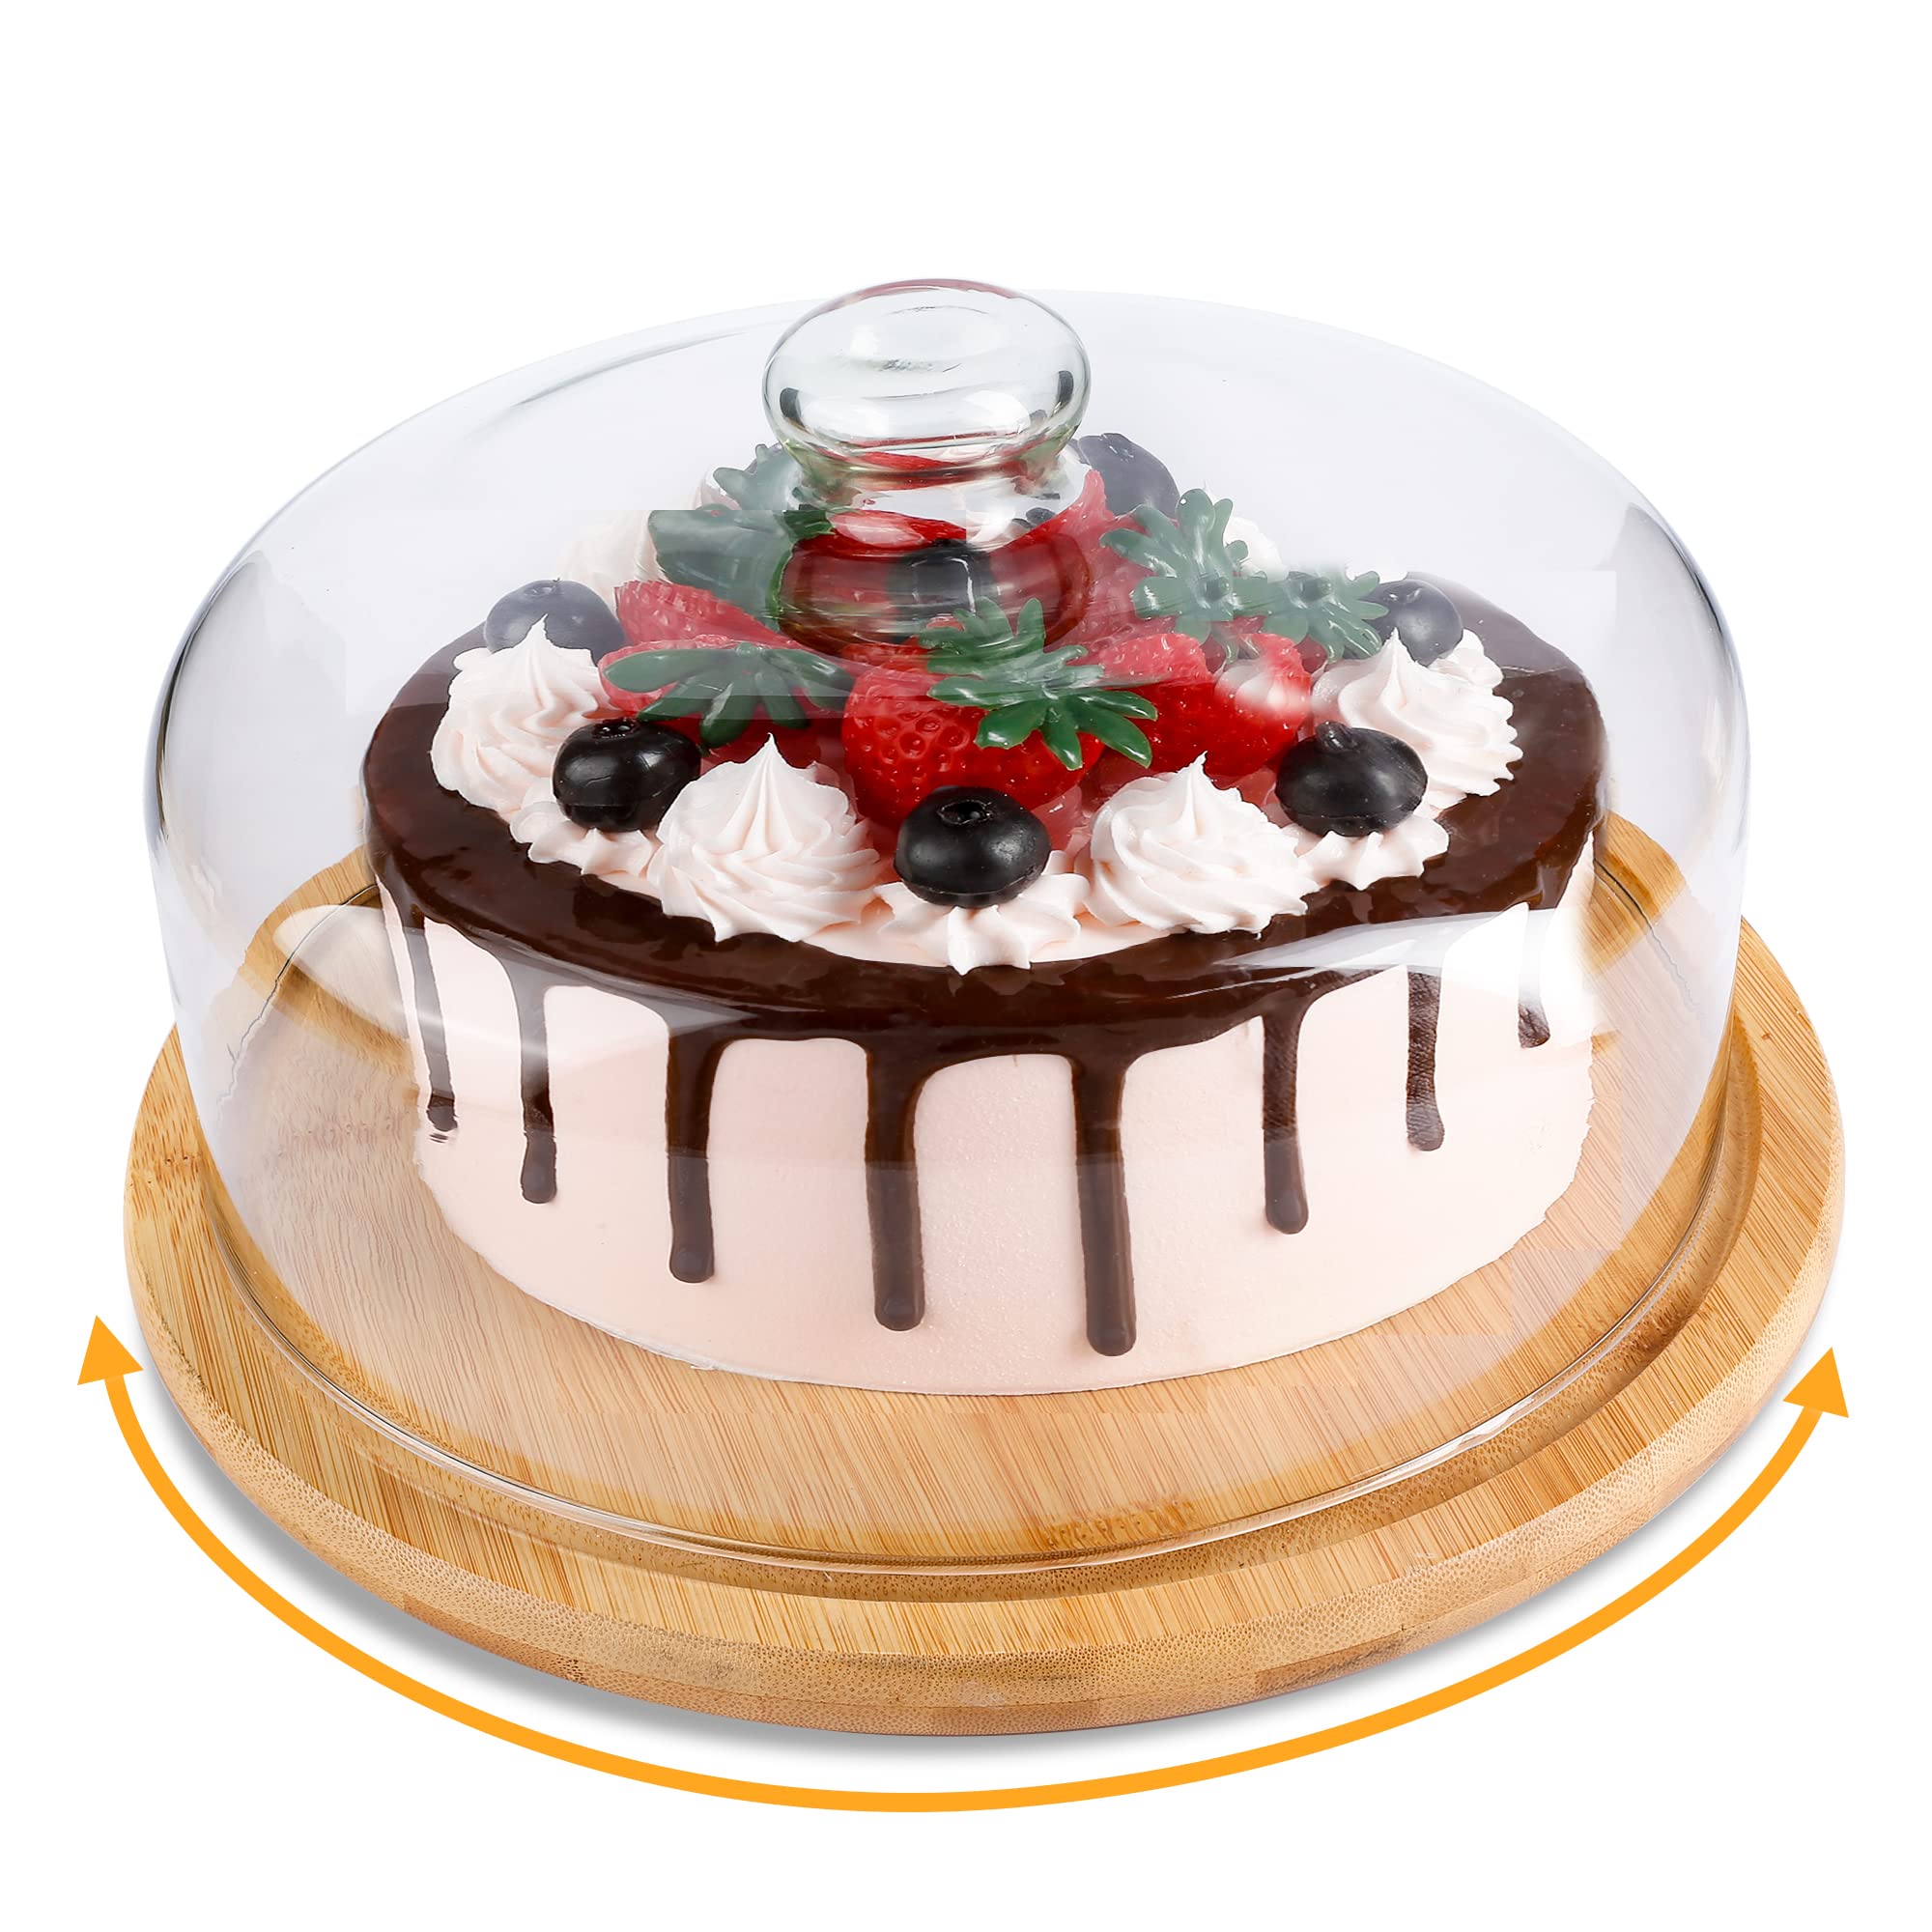 11 Inch Bamboo Cake Stand with 10 Inch Glass Dome Cover, ANMEISH Rotating Cupcake Display Plate with Lid, Cake Holder with Turntable Base